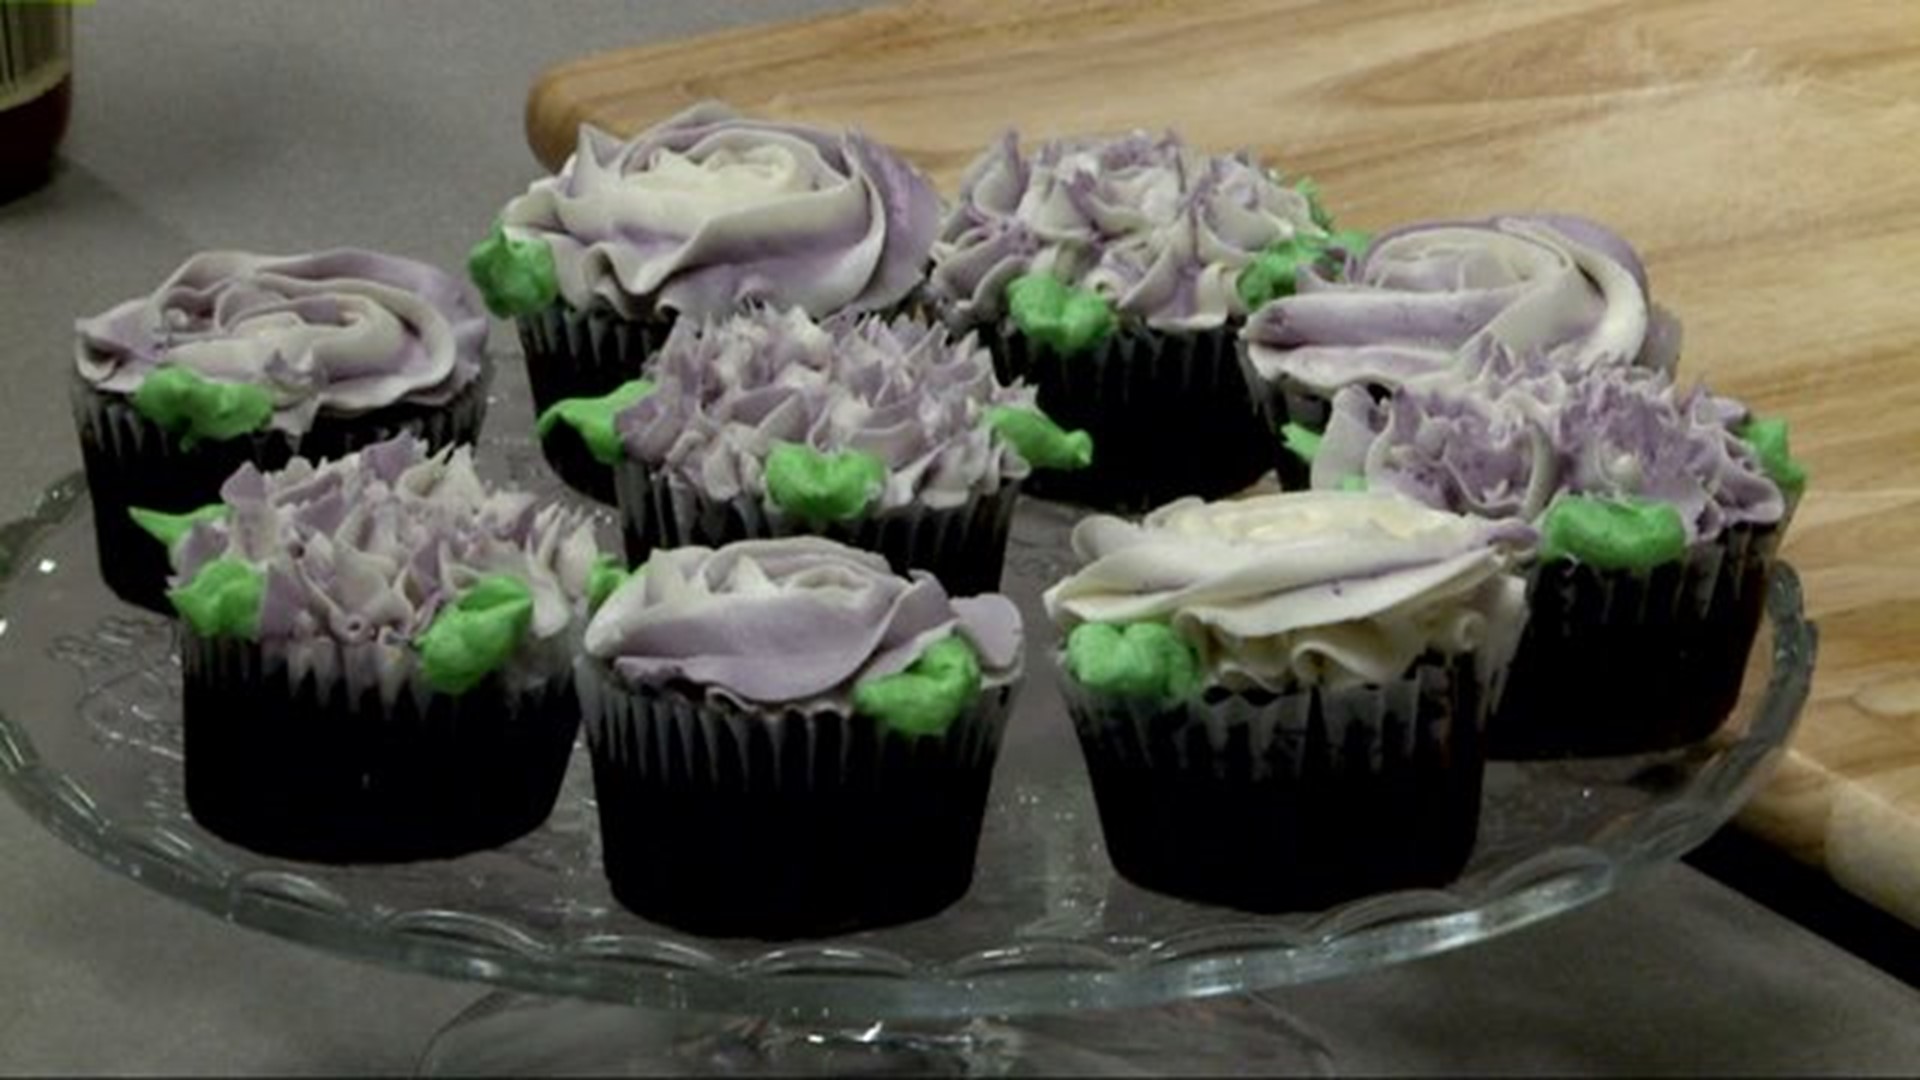 "Made with Love, Not Gluten": Black Forest Cupcakes Presentation